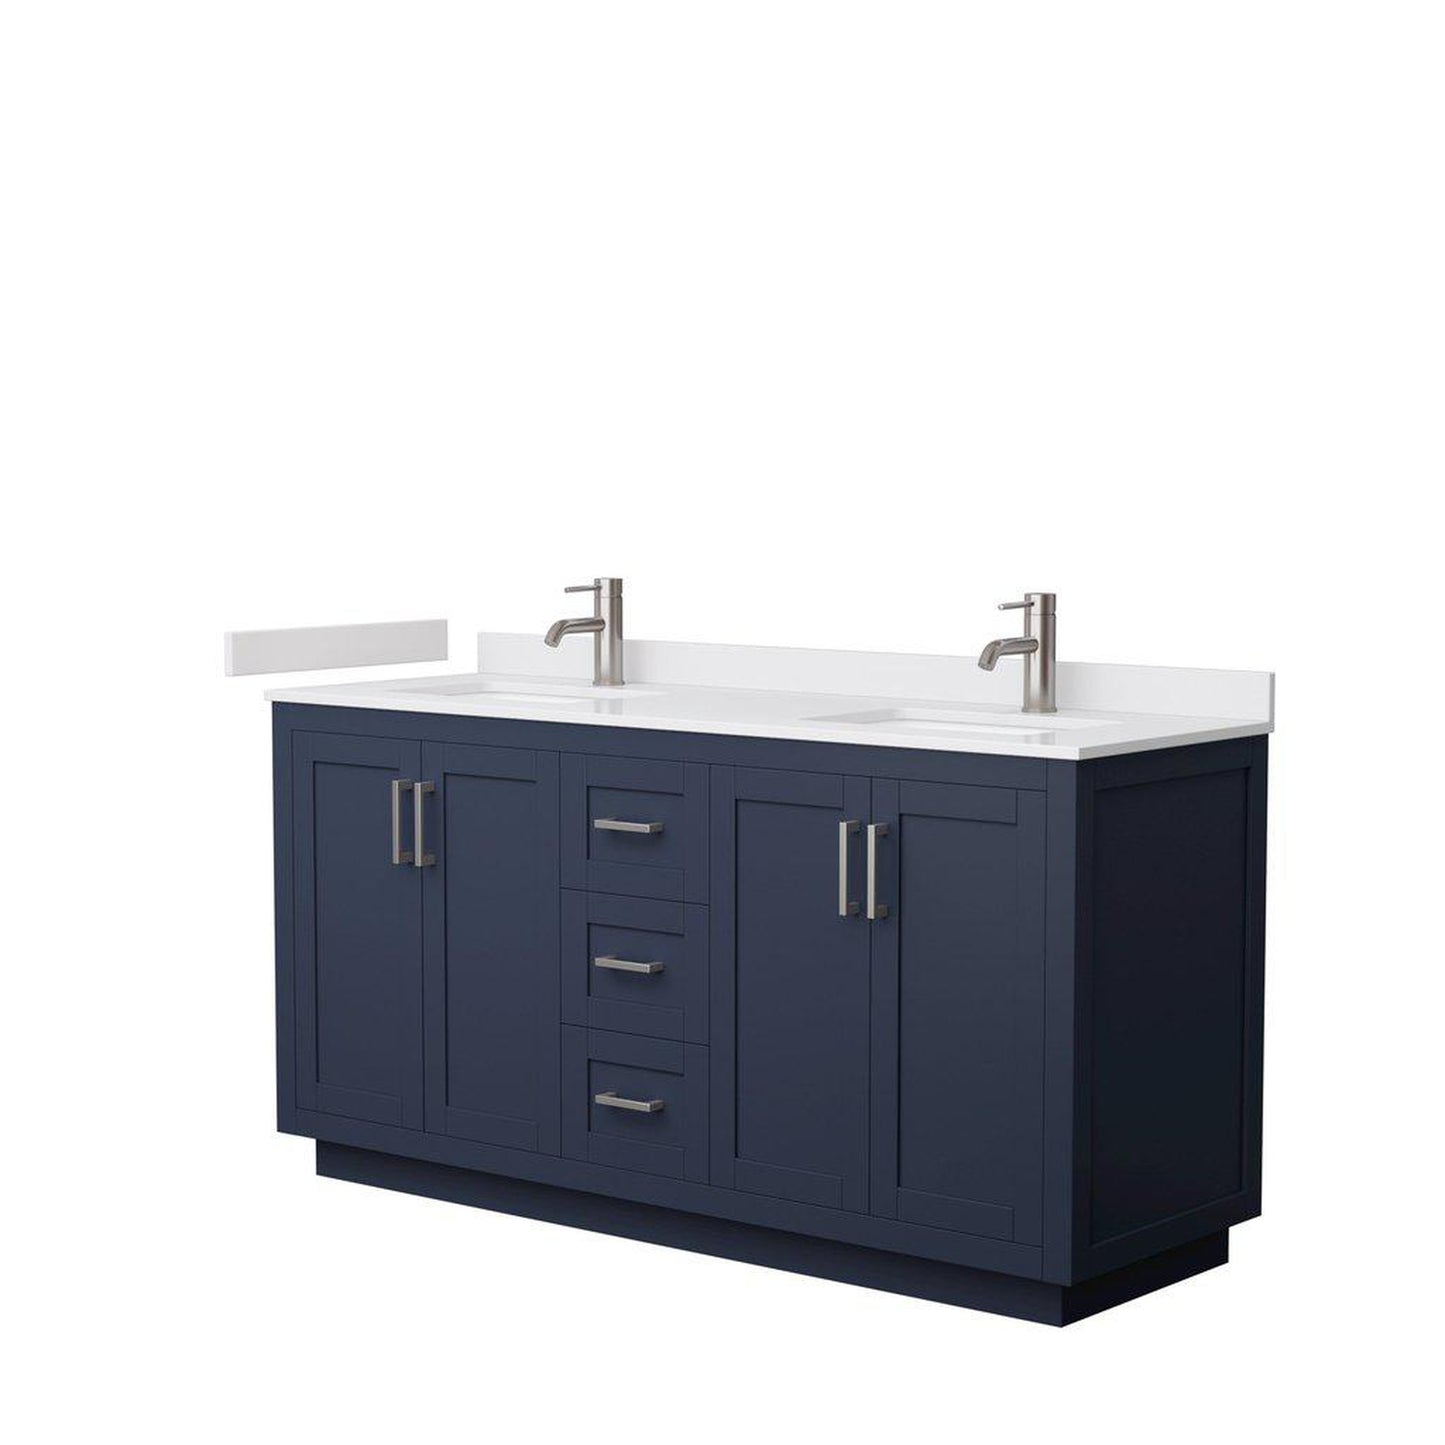 Wyndham Collection Miranda 66" Double Bathroom Dark Blue Vanity Set With White Cultured Marble Countertop, Undermount Square Sink, And Brushed Nickel Trim